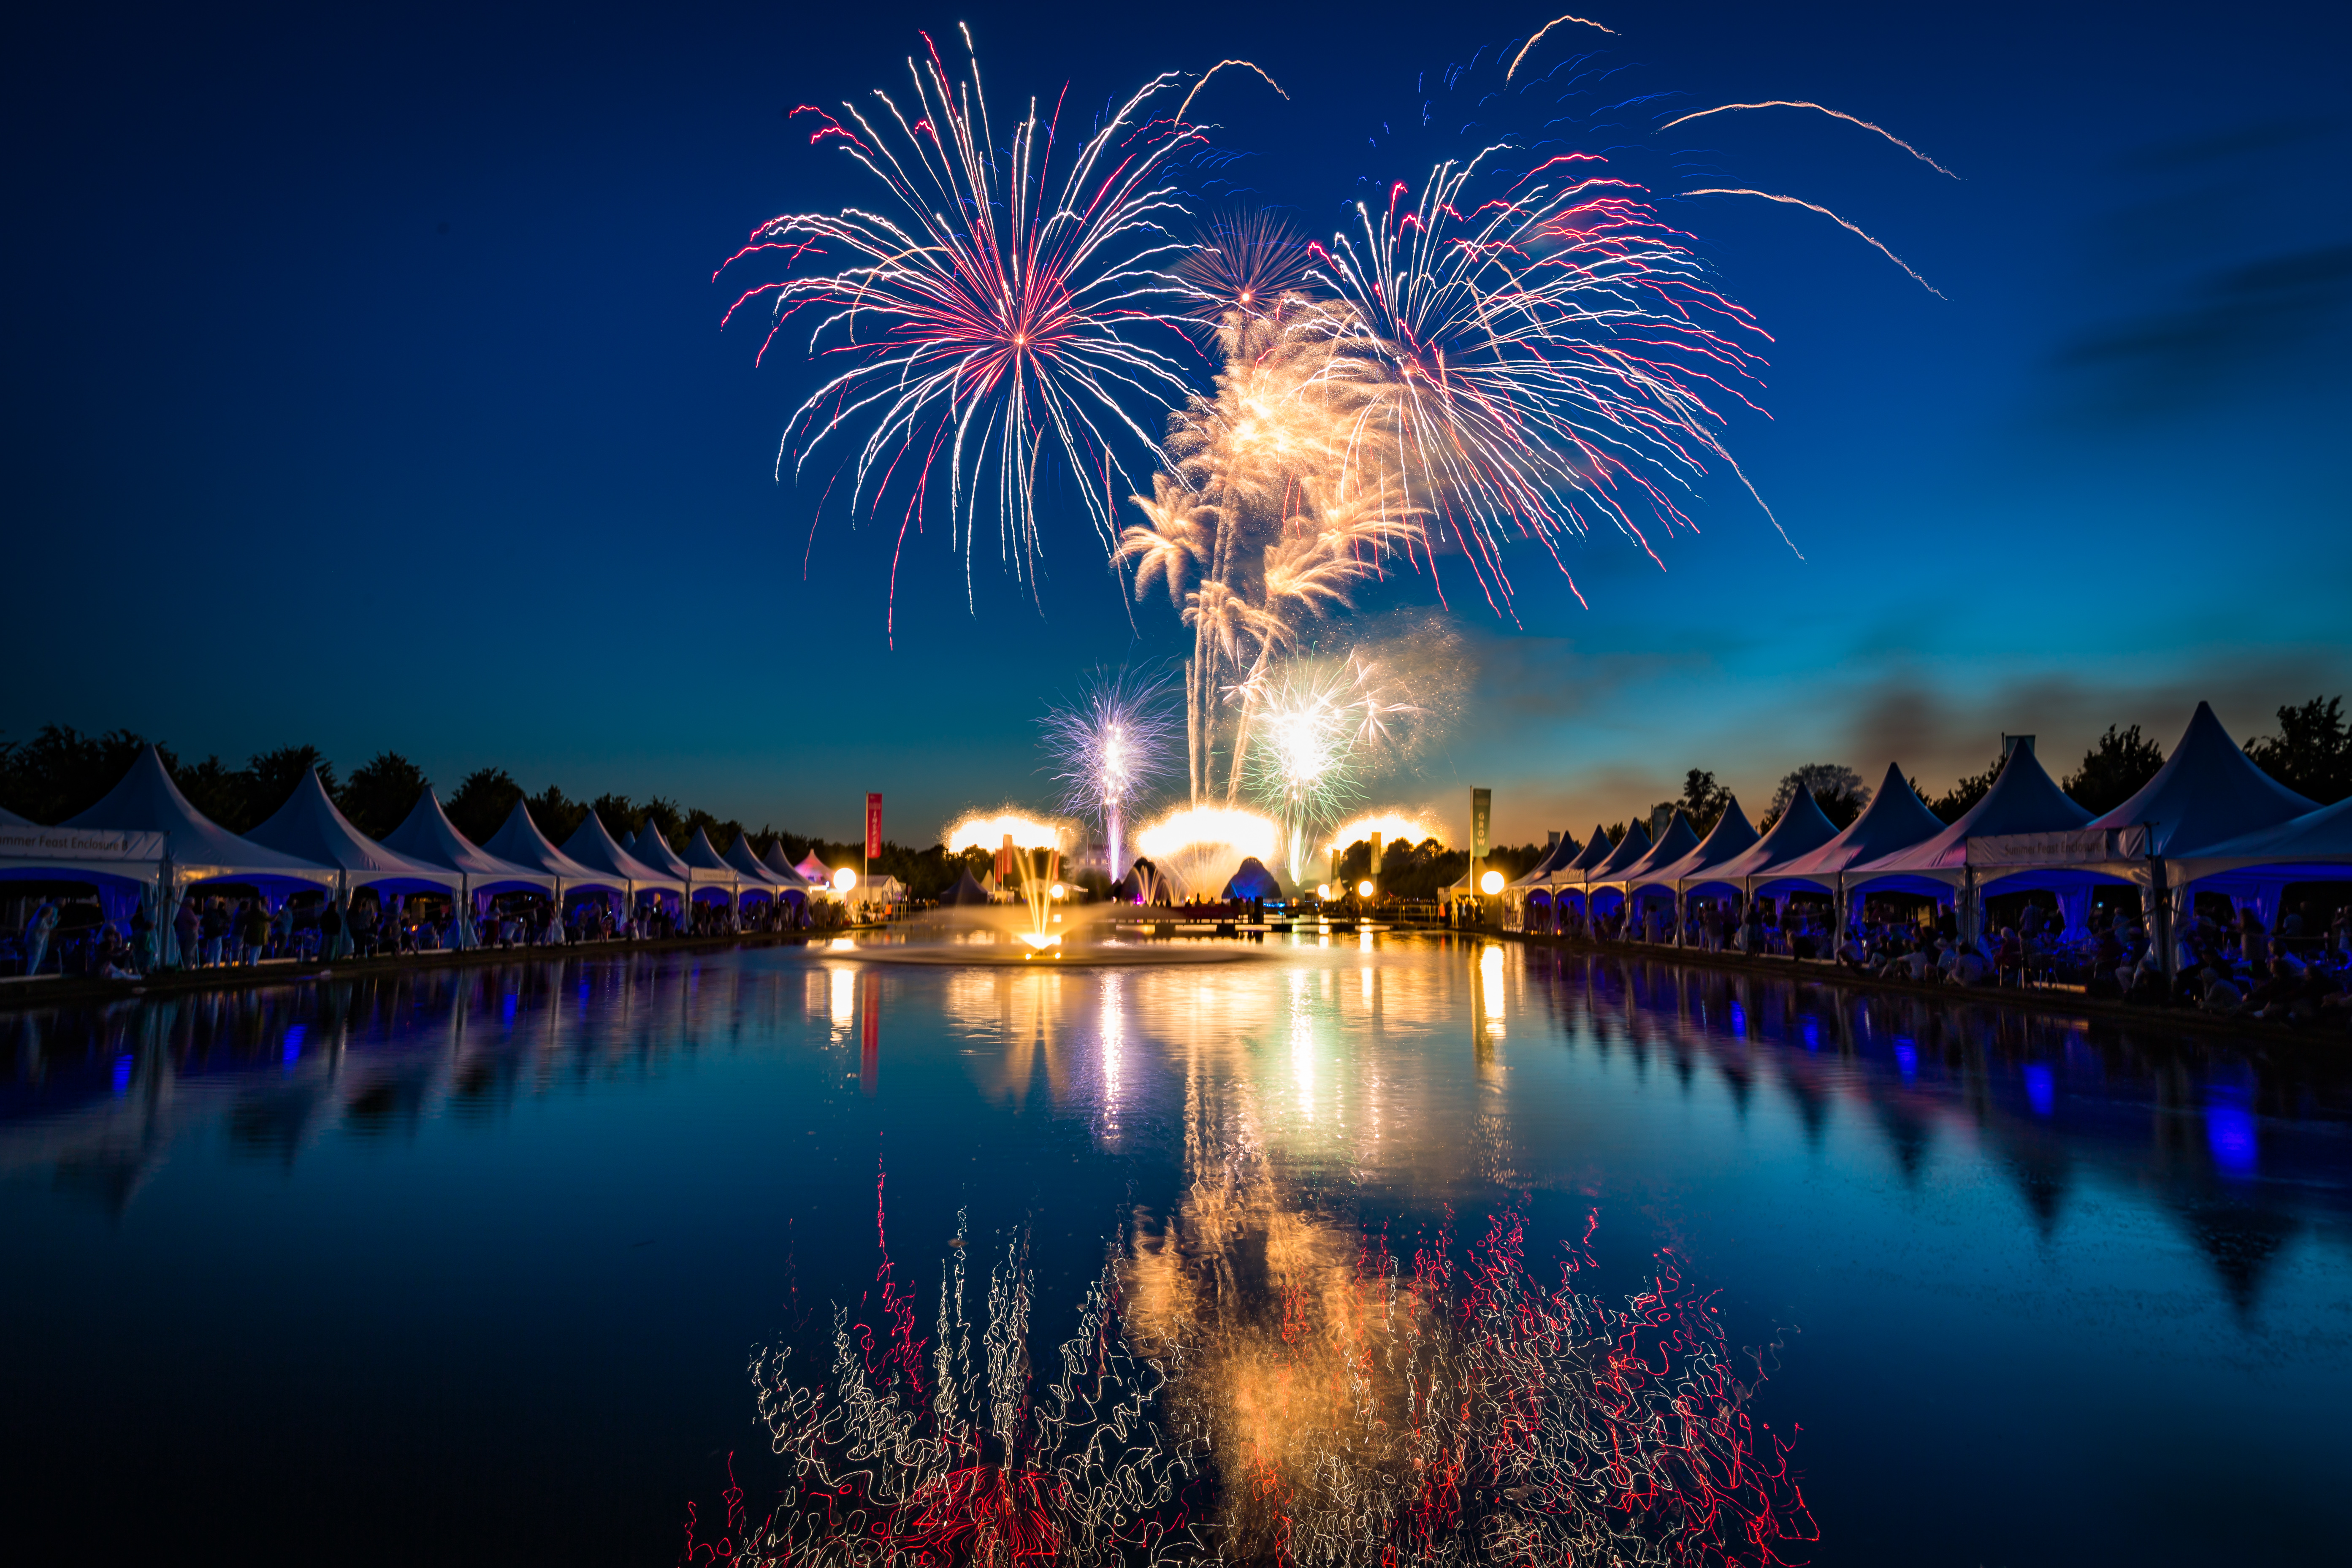 Fireworks reflections in the long water at Hampton Court Palace for the RHS Hampton Court Palace Flower Show